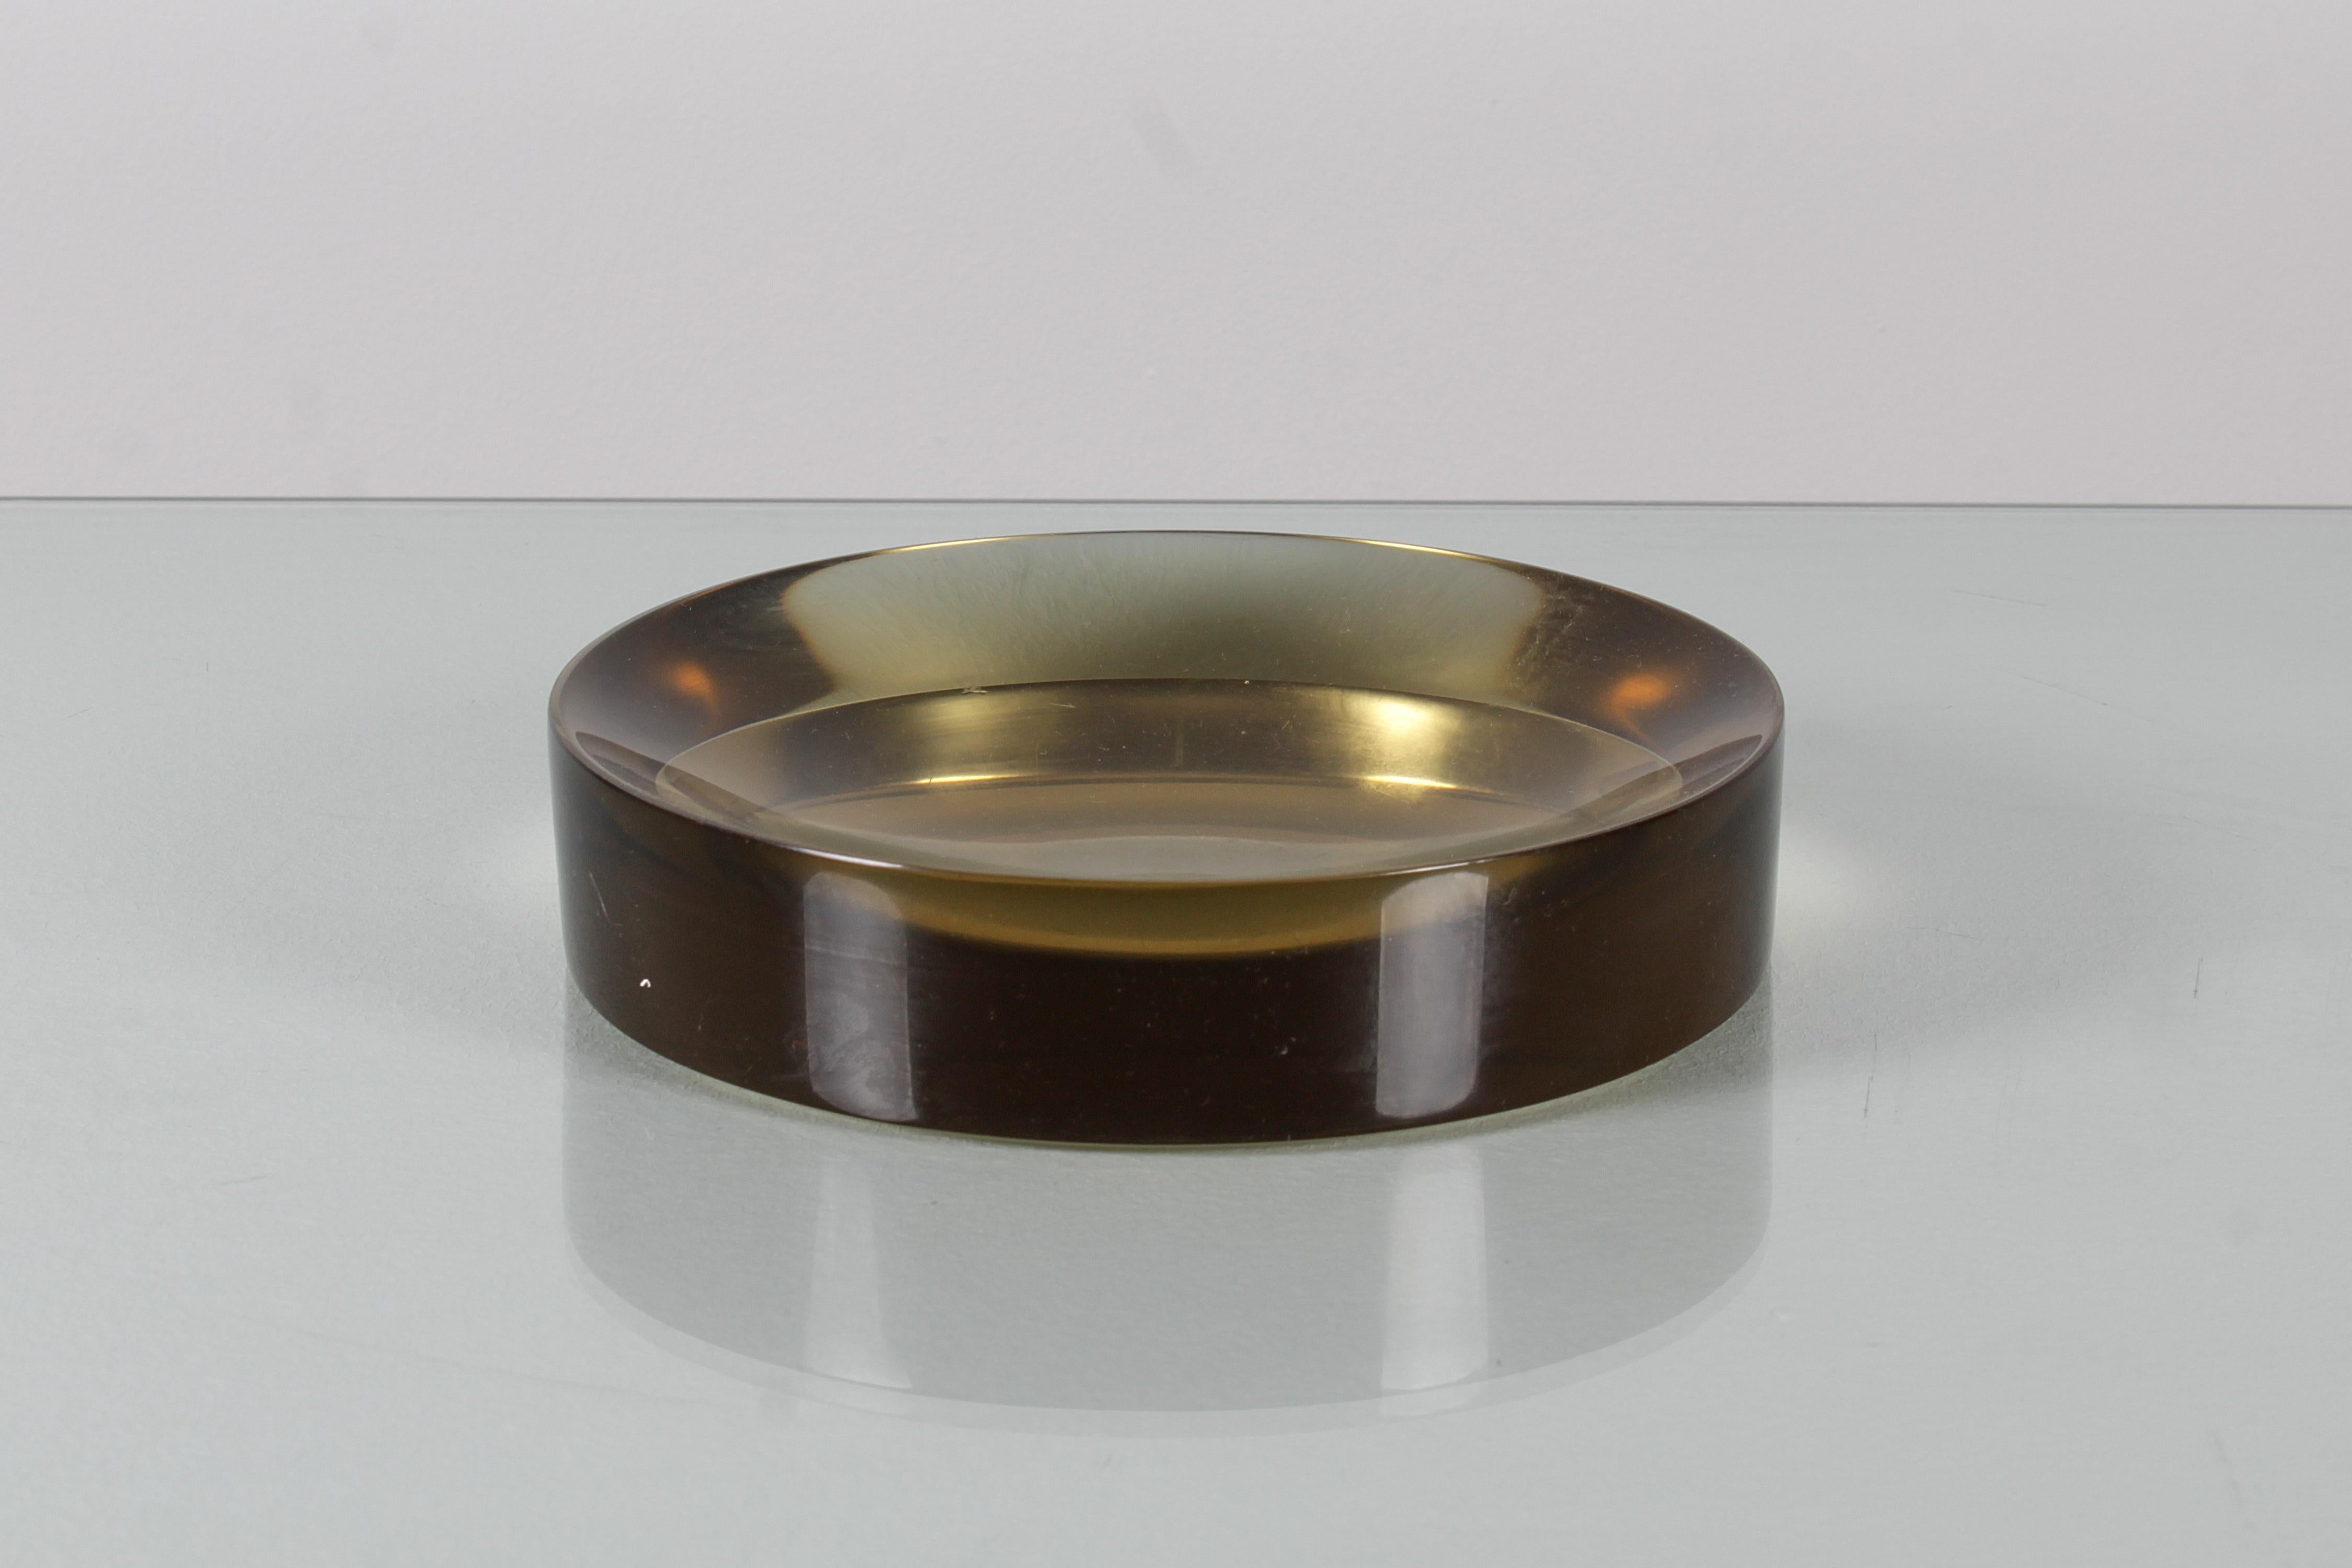 Very refined circular pocket emptier in solid dark yellow Murano glass. Visible a couple of very small chips on the edge of the base. Murano production by Carlo Nason, Italy 60s.